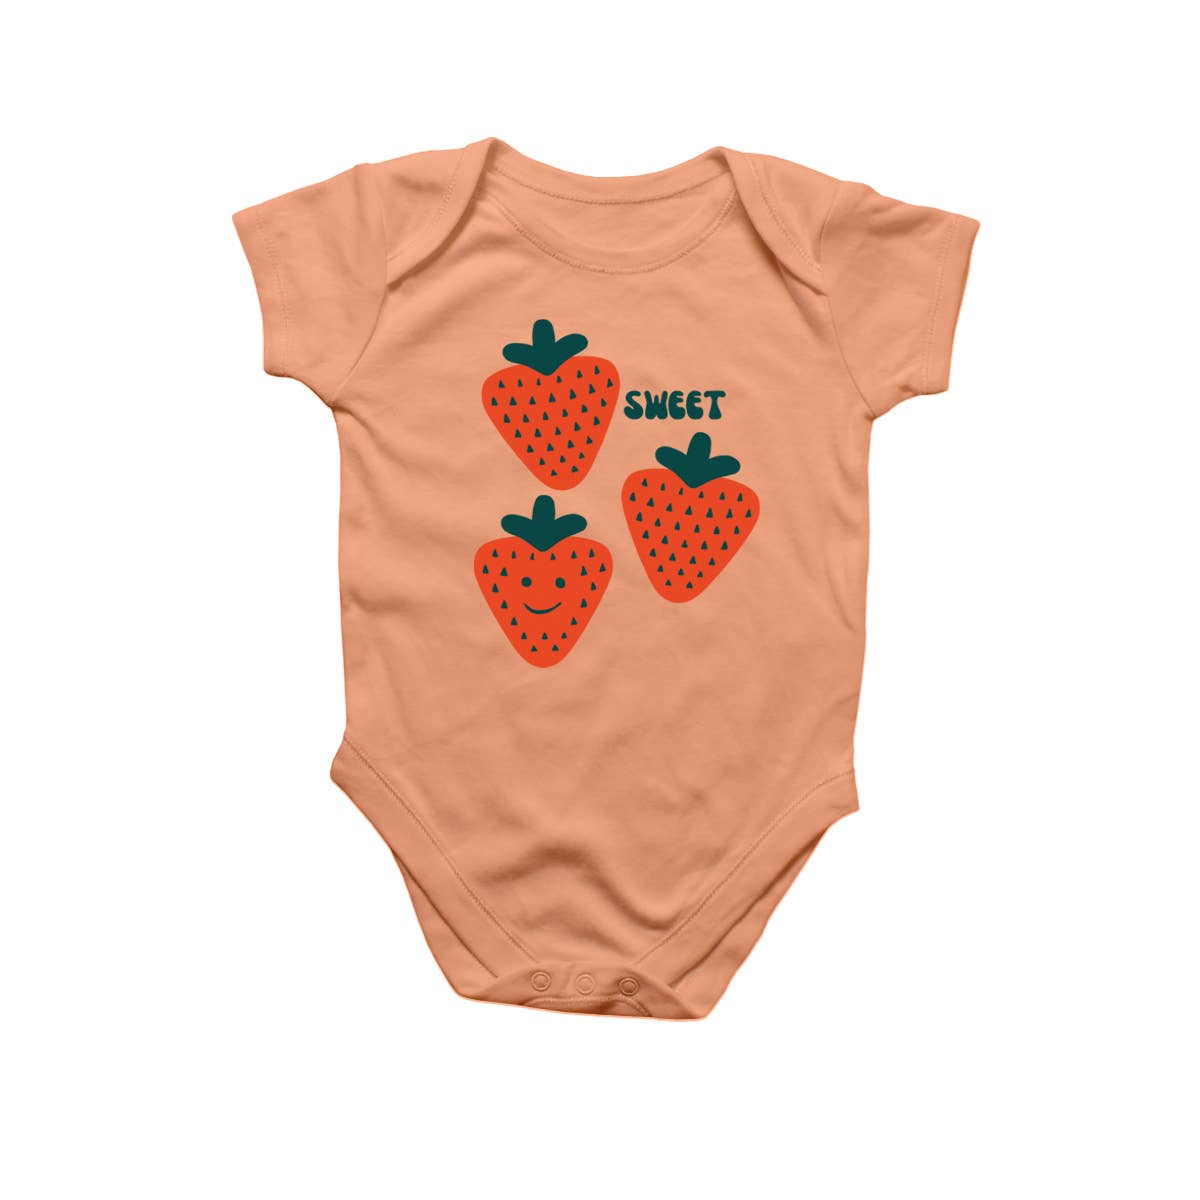 Pink baby onesie with snap closure on bottom -- design is 3 strawberries, with text that says "sweet" in top right and one with a smiley face 